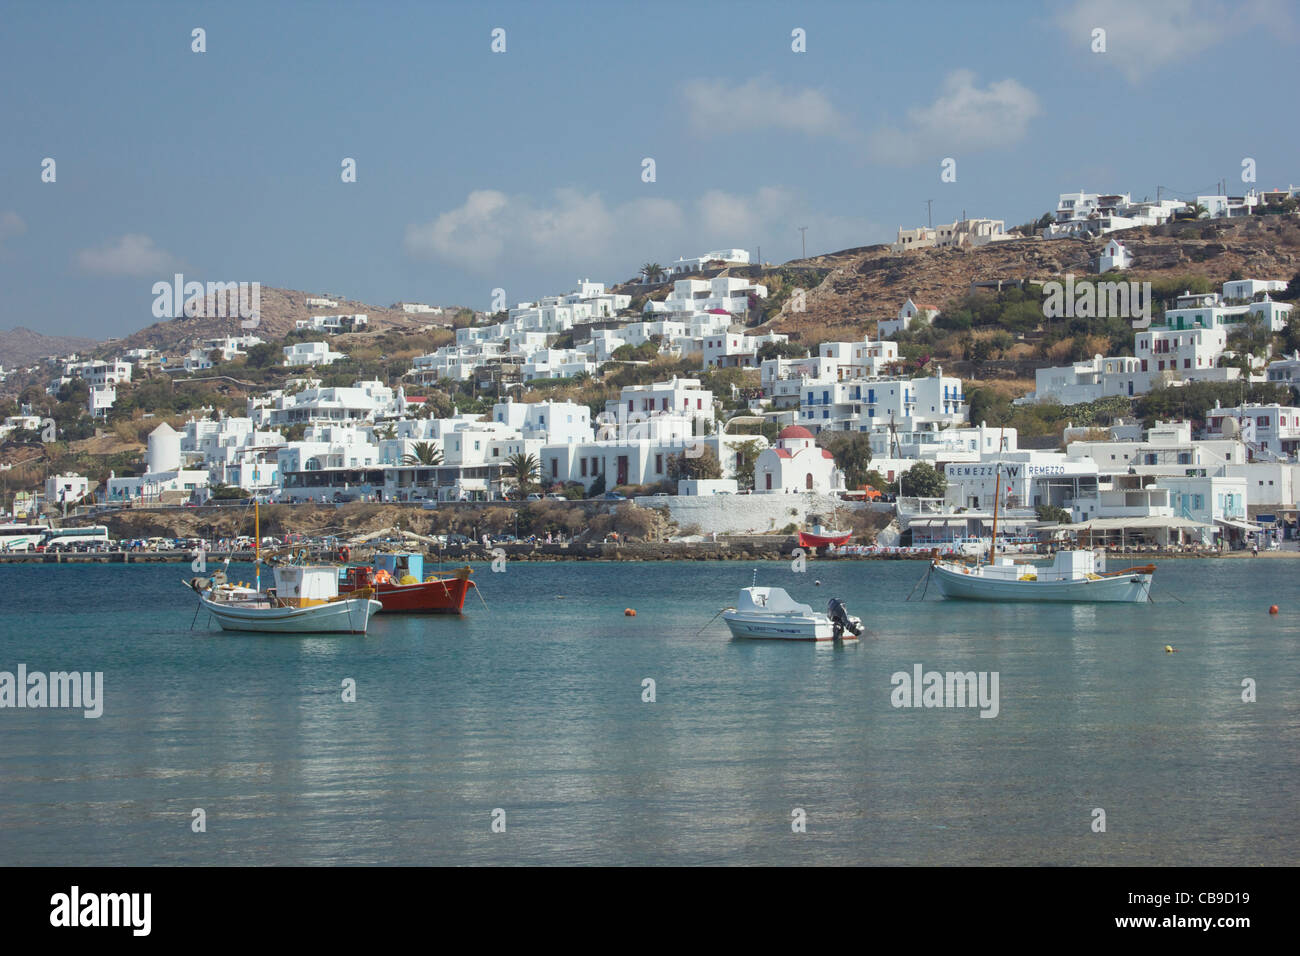 Buildings and boats around the harbor of Mykonos, Greece. Stock Photo